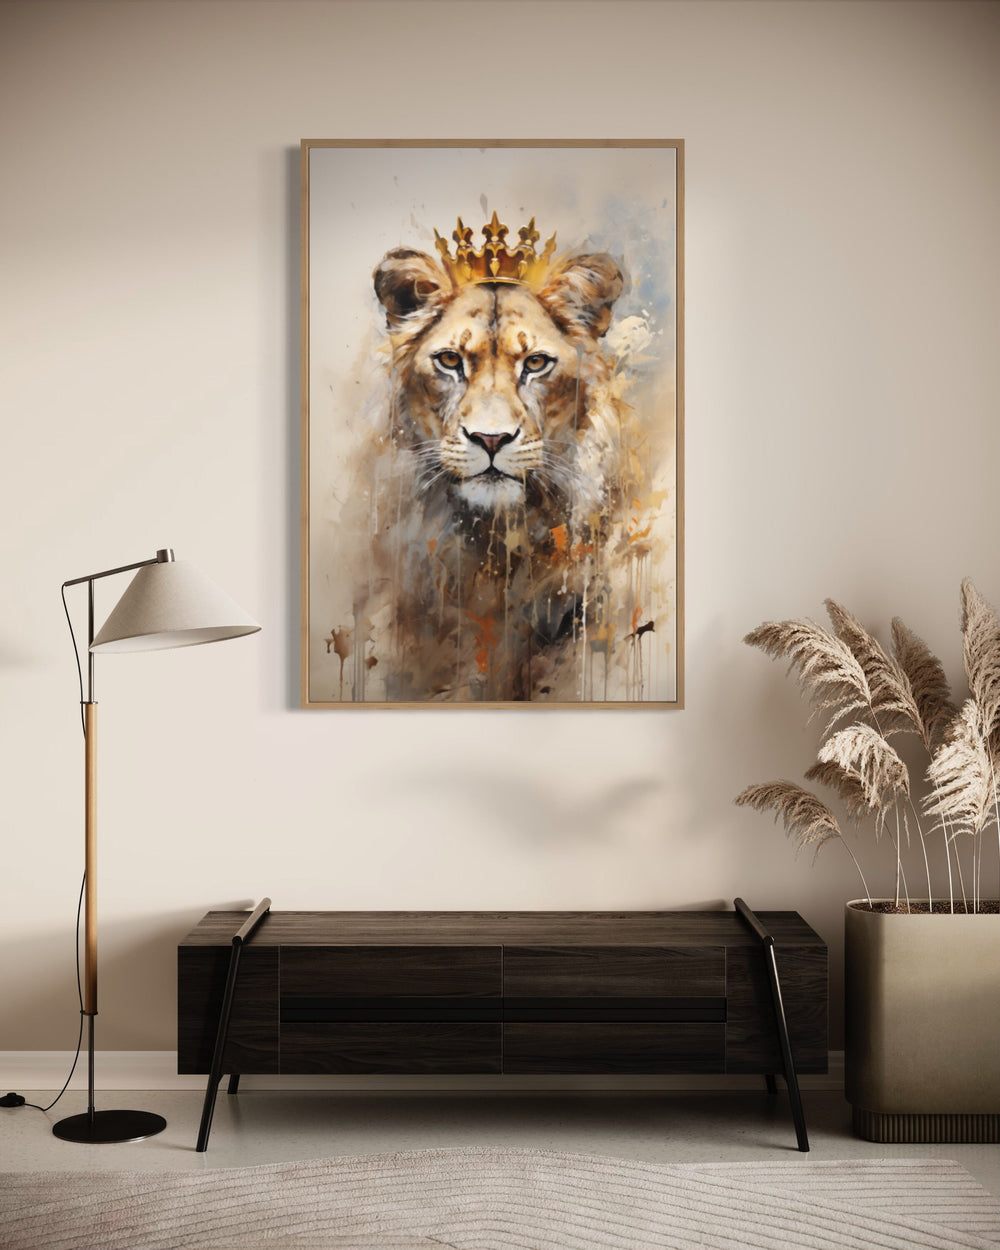 Lioness Queen With Crown Beige Gold Framed Canvas Wall Art in living room